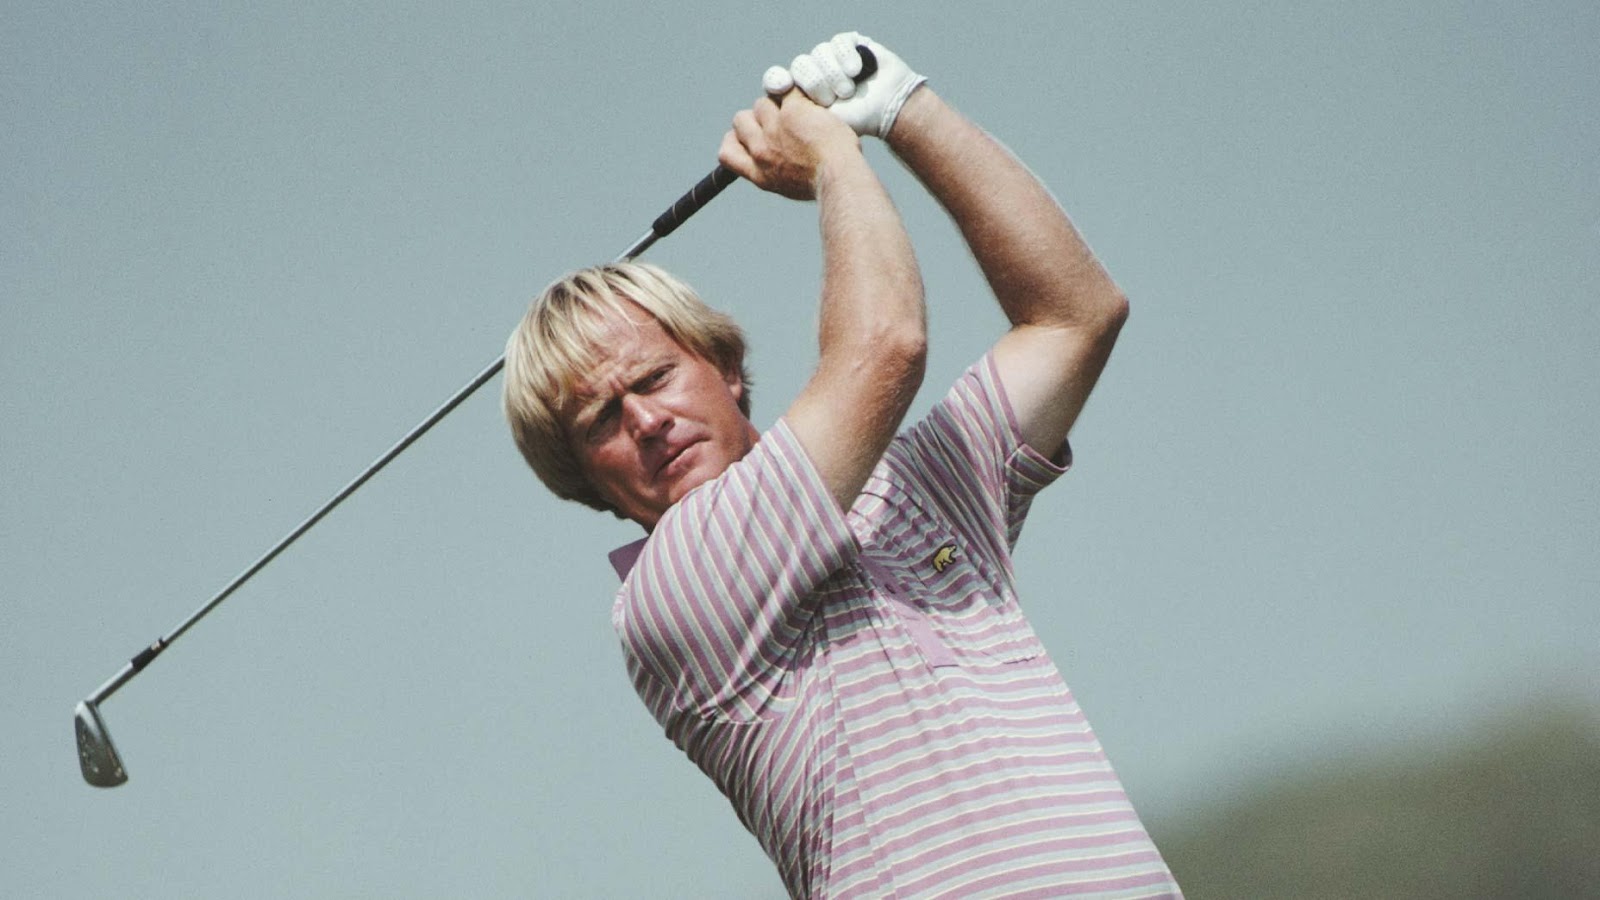 Jack Nicklaus reveals 2 lessons in preparation that propelled his career